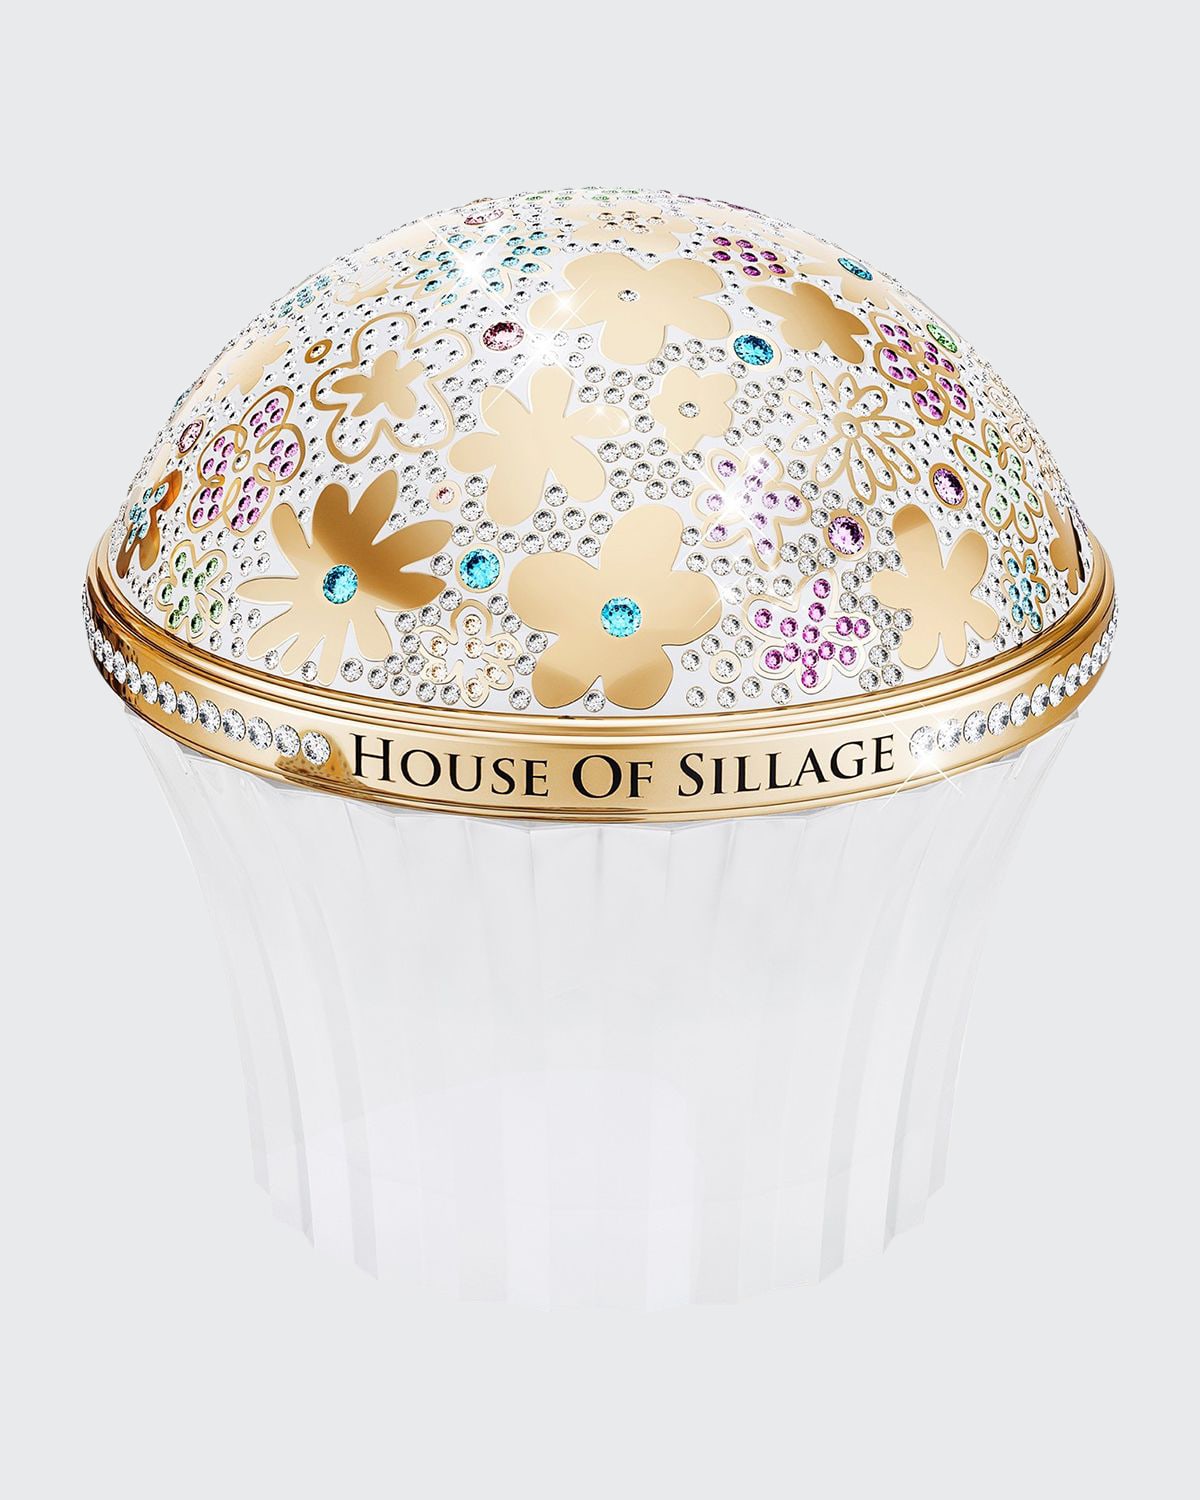 House of Sillage Limited Edition Whispers of Truth Parfum, 2.5 oz./ 75 mL